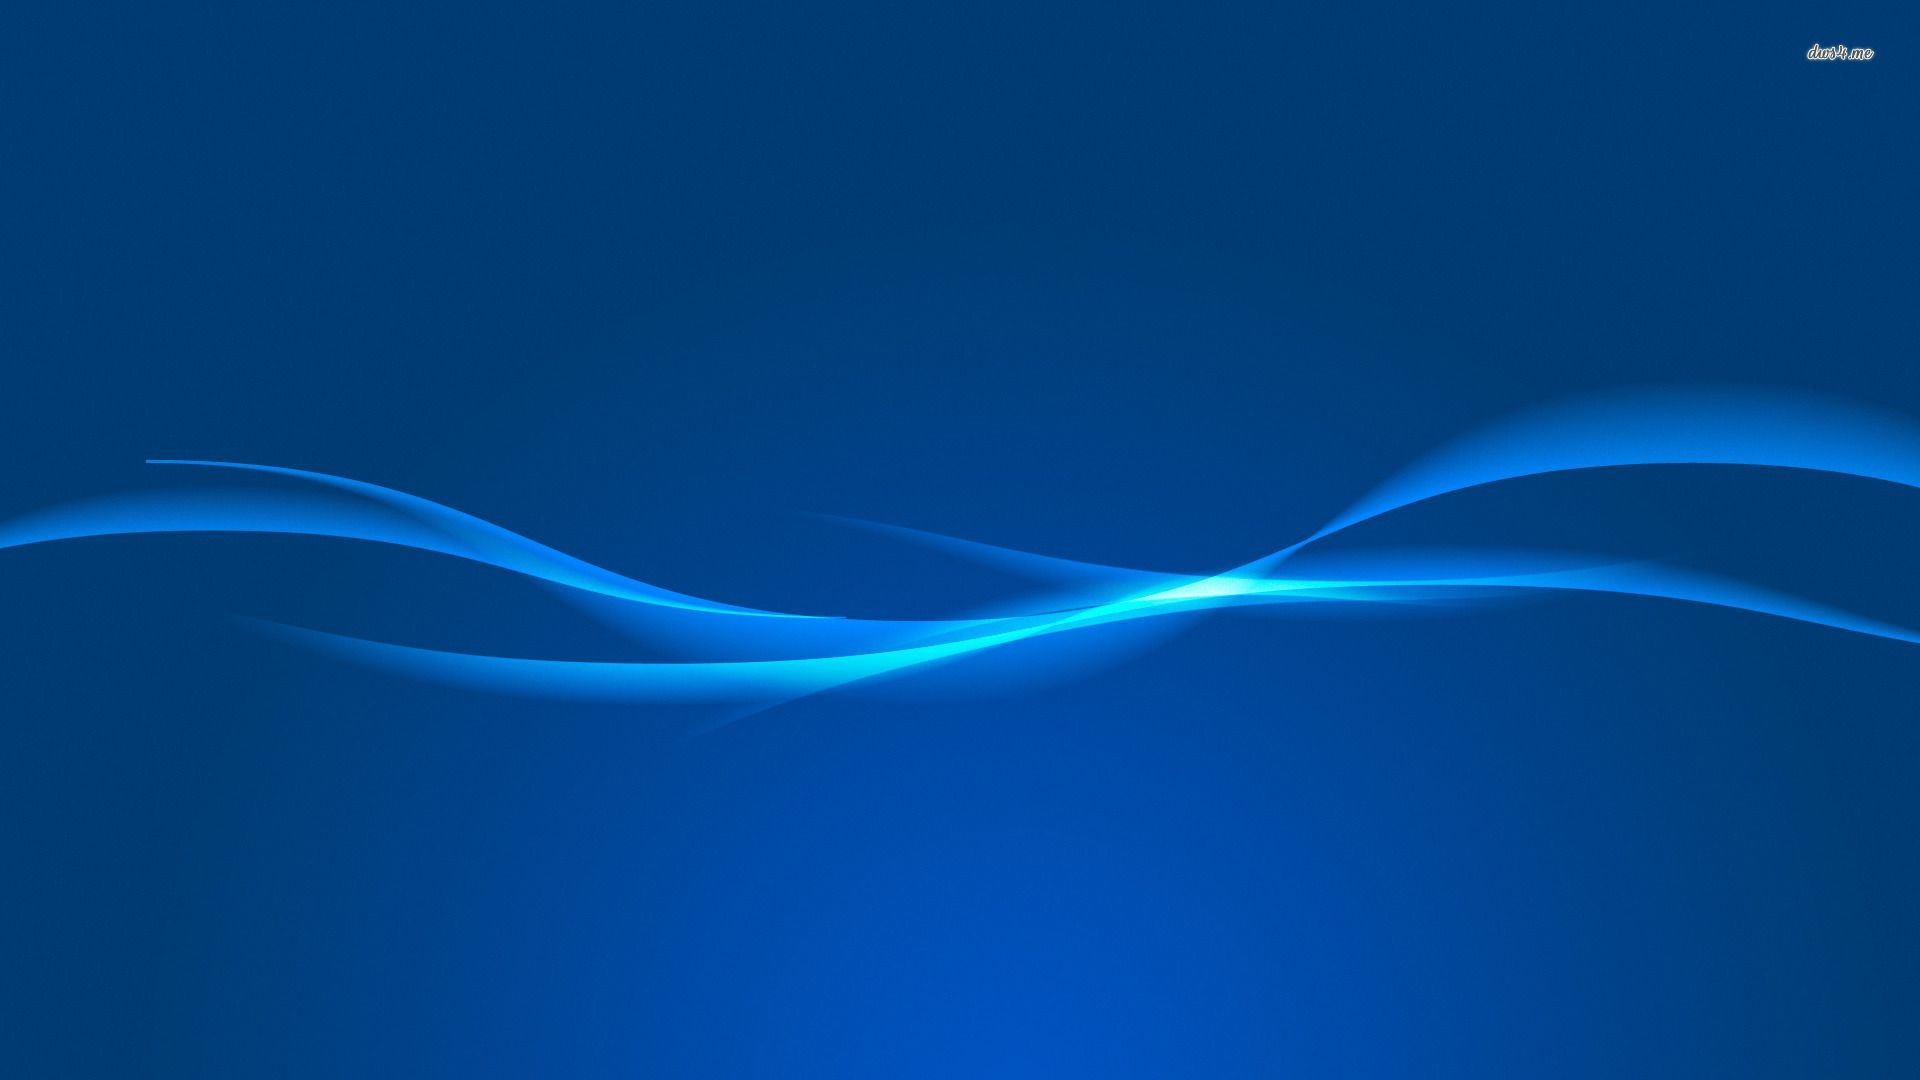 Ps4 Background Wallpaper (83+ images)